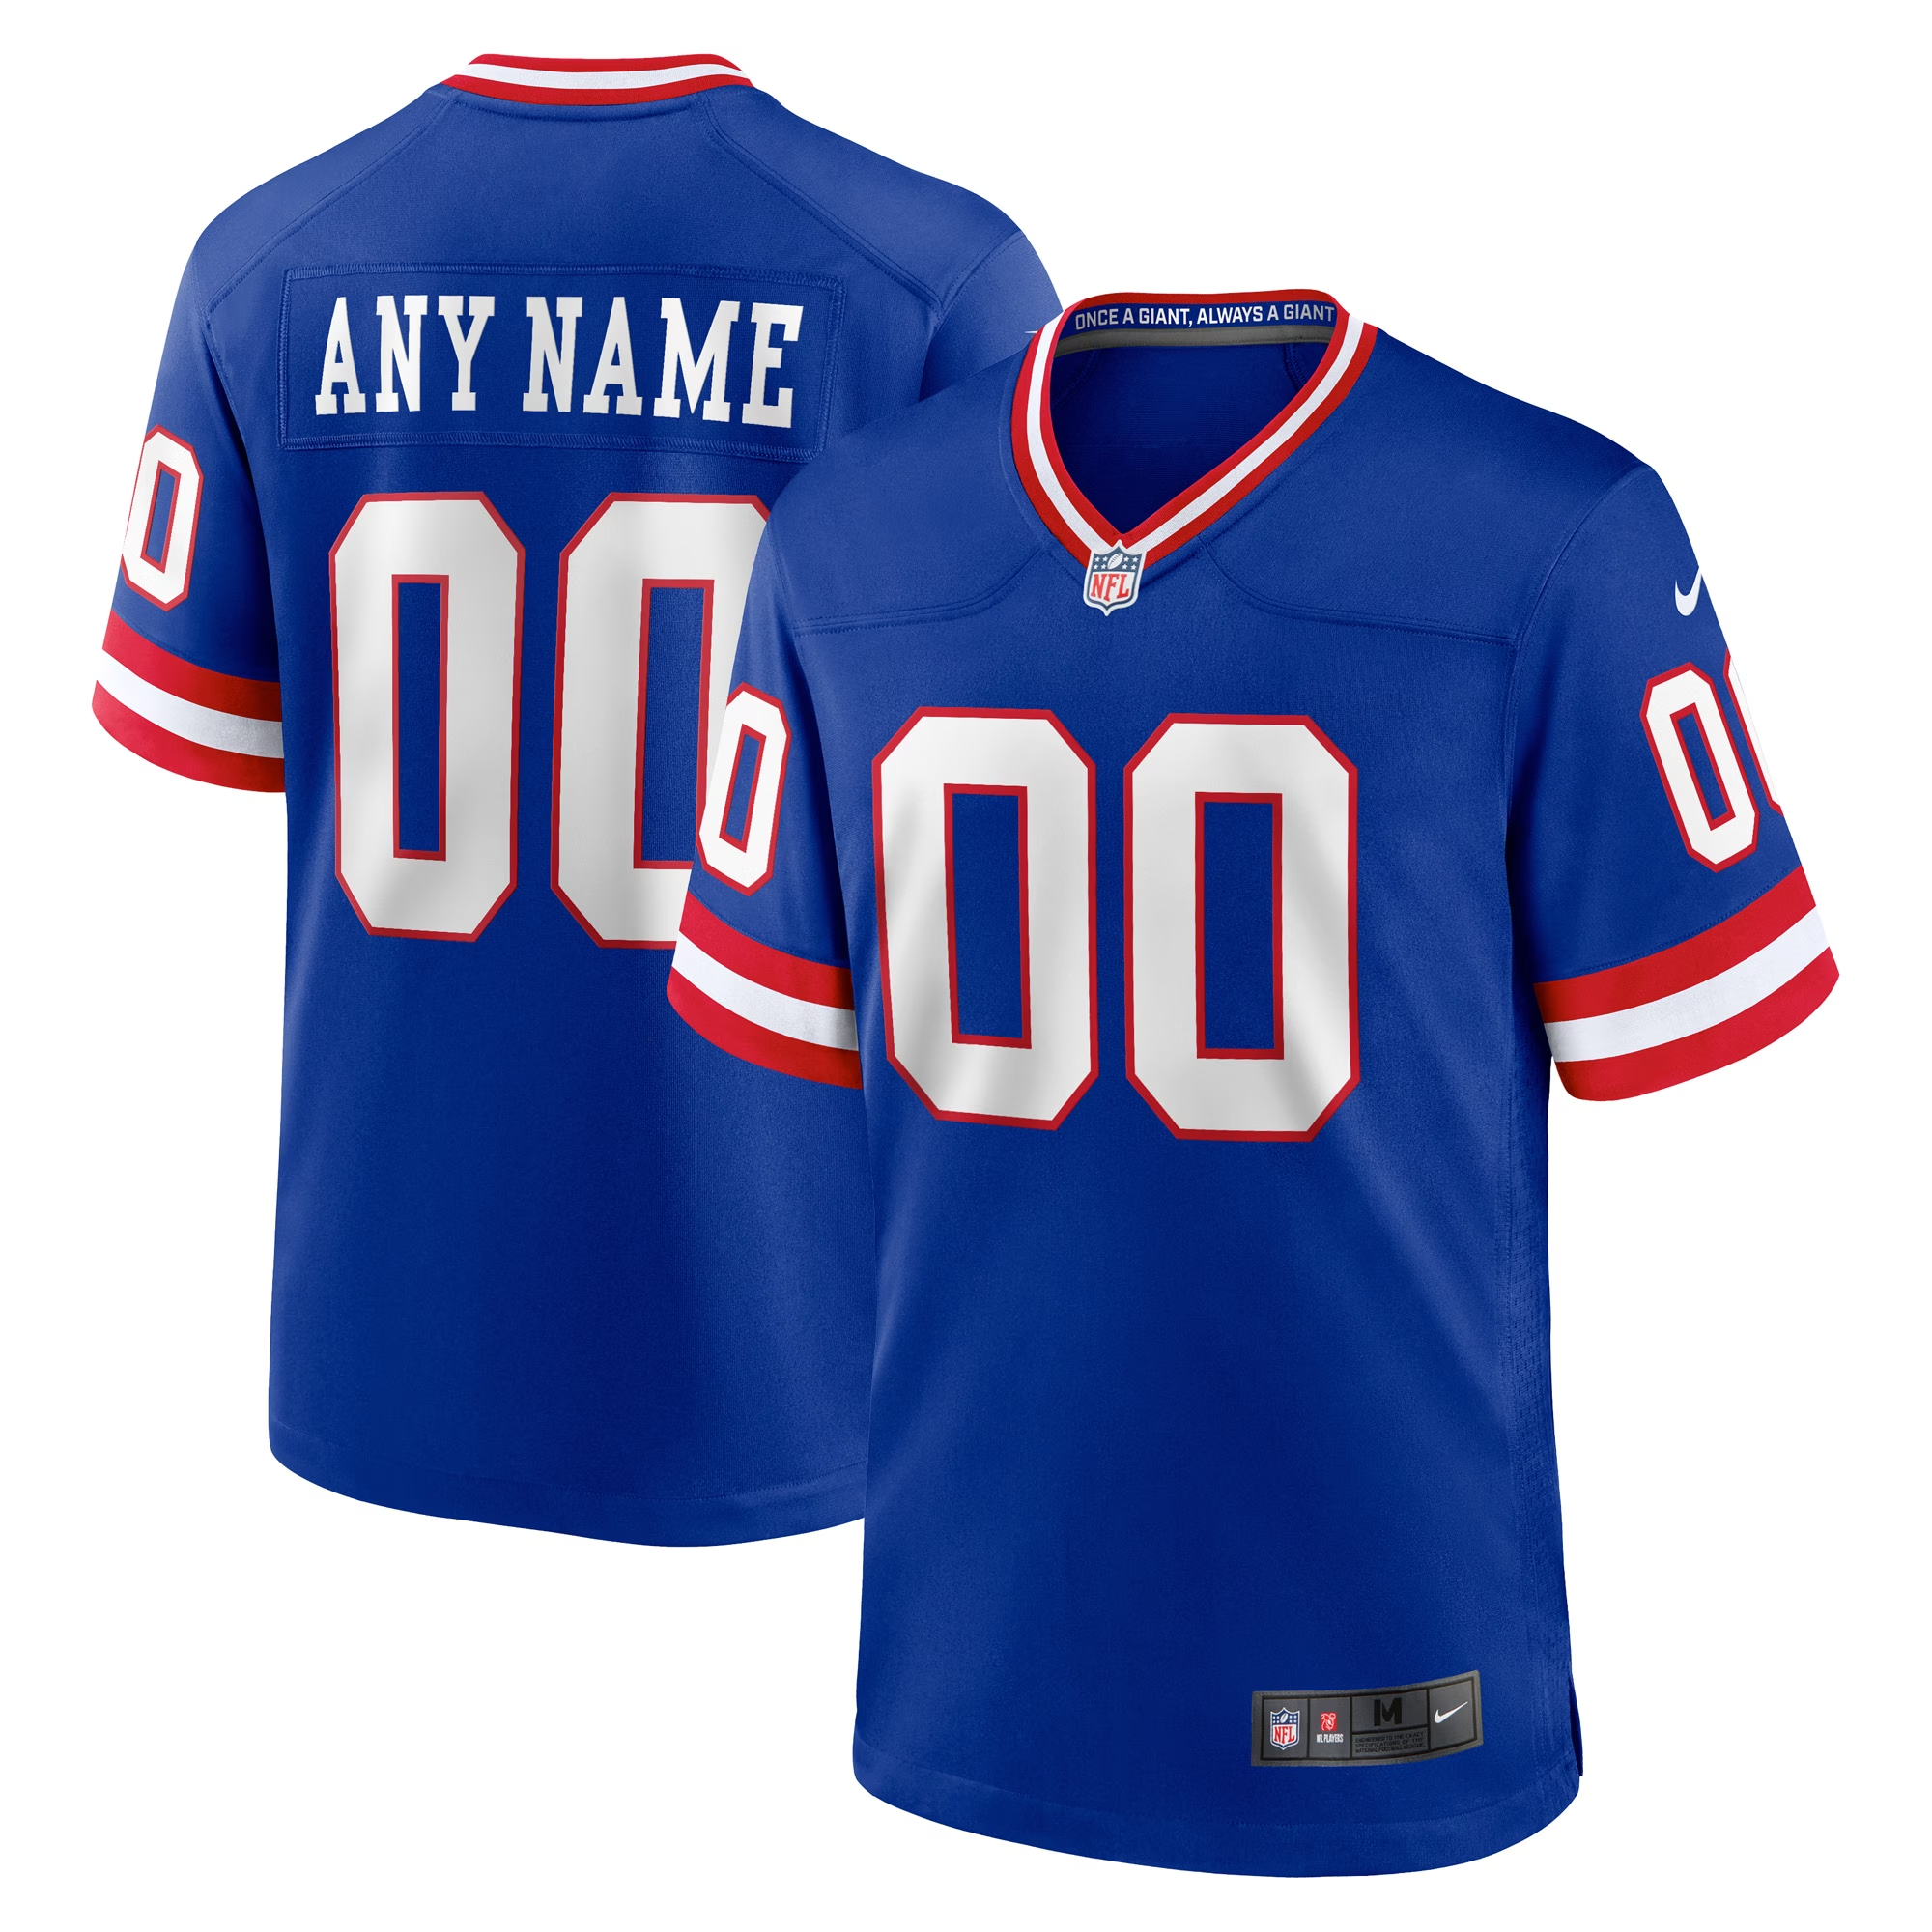 Men's New York Giants ACTIVE PLAYER Royal Classic Custom Game Stitched Jersey